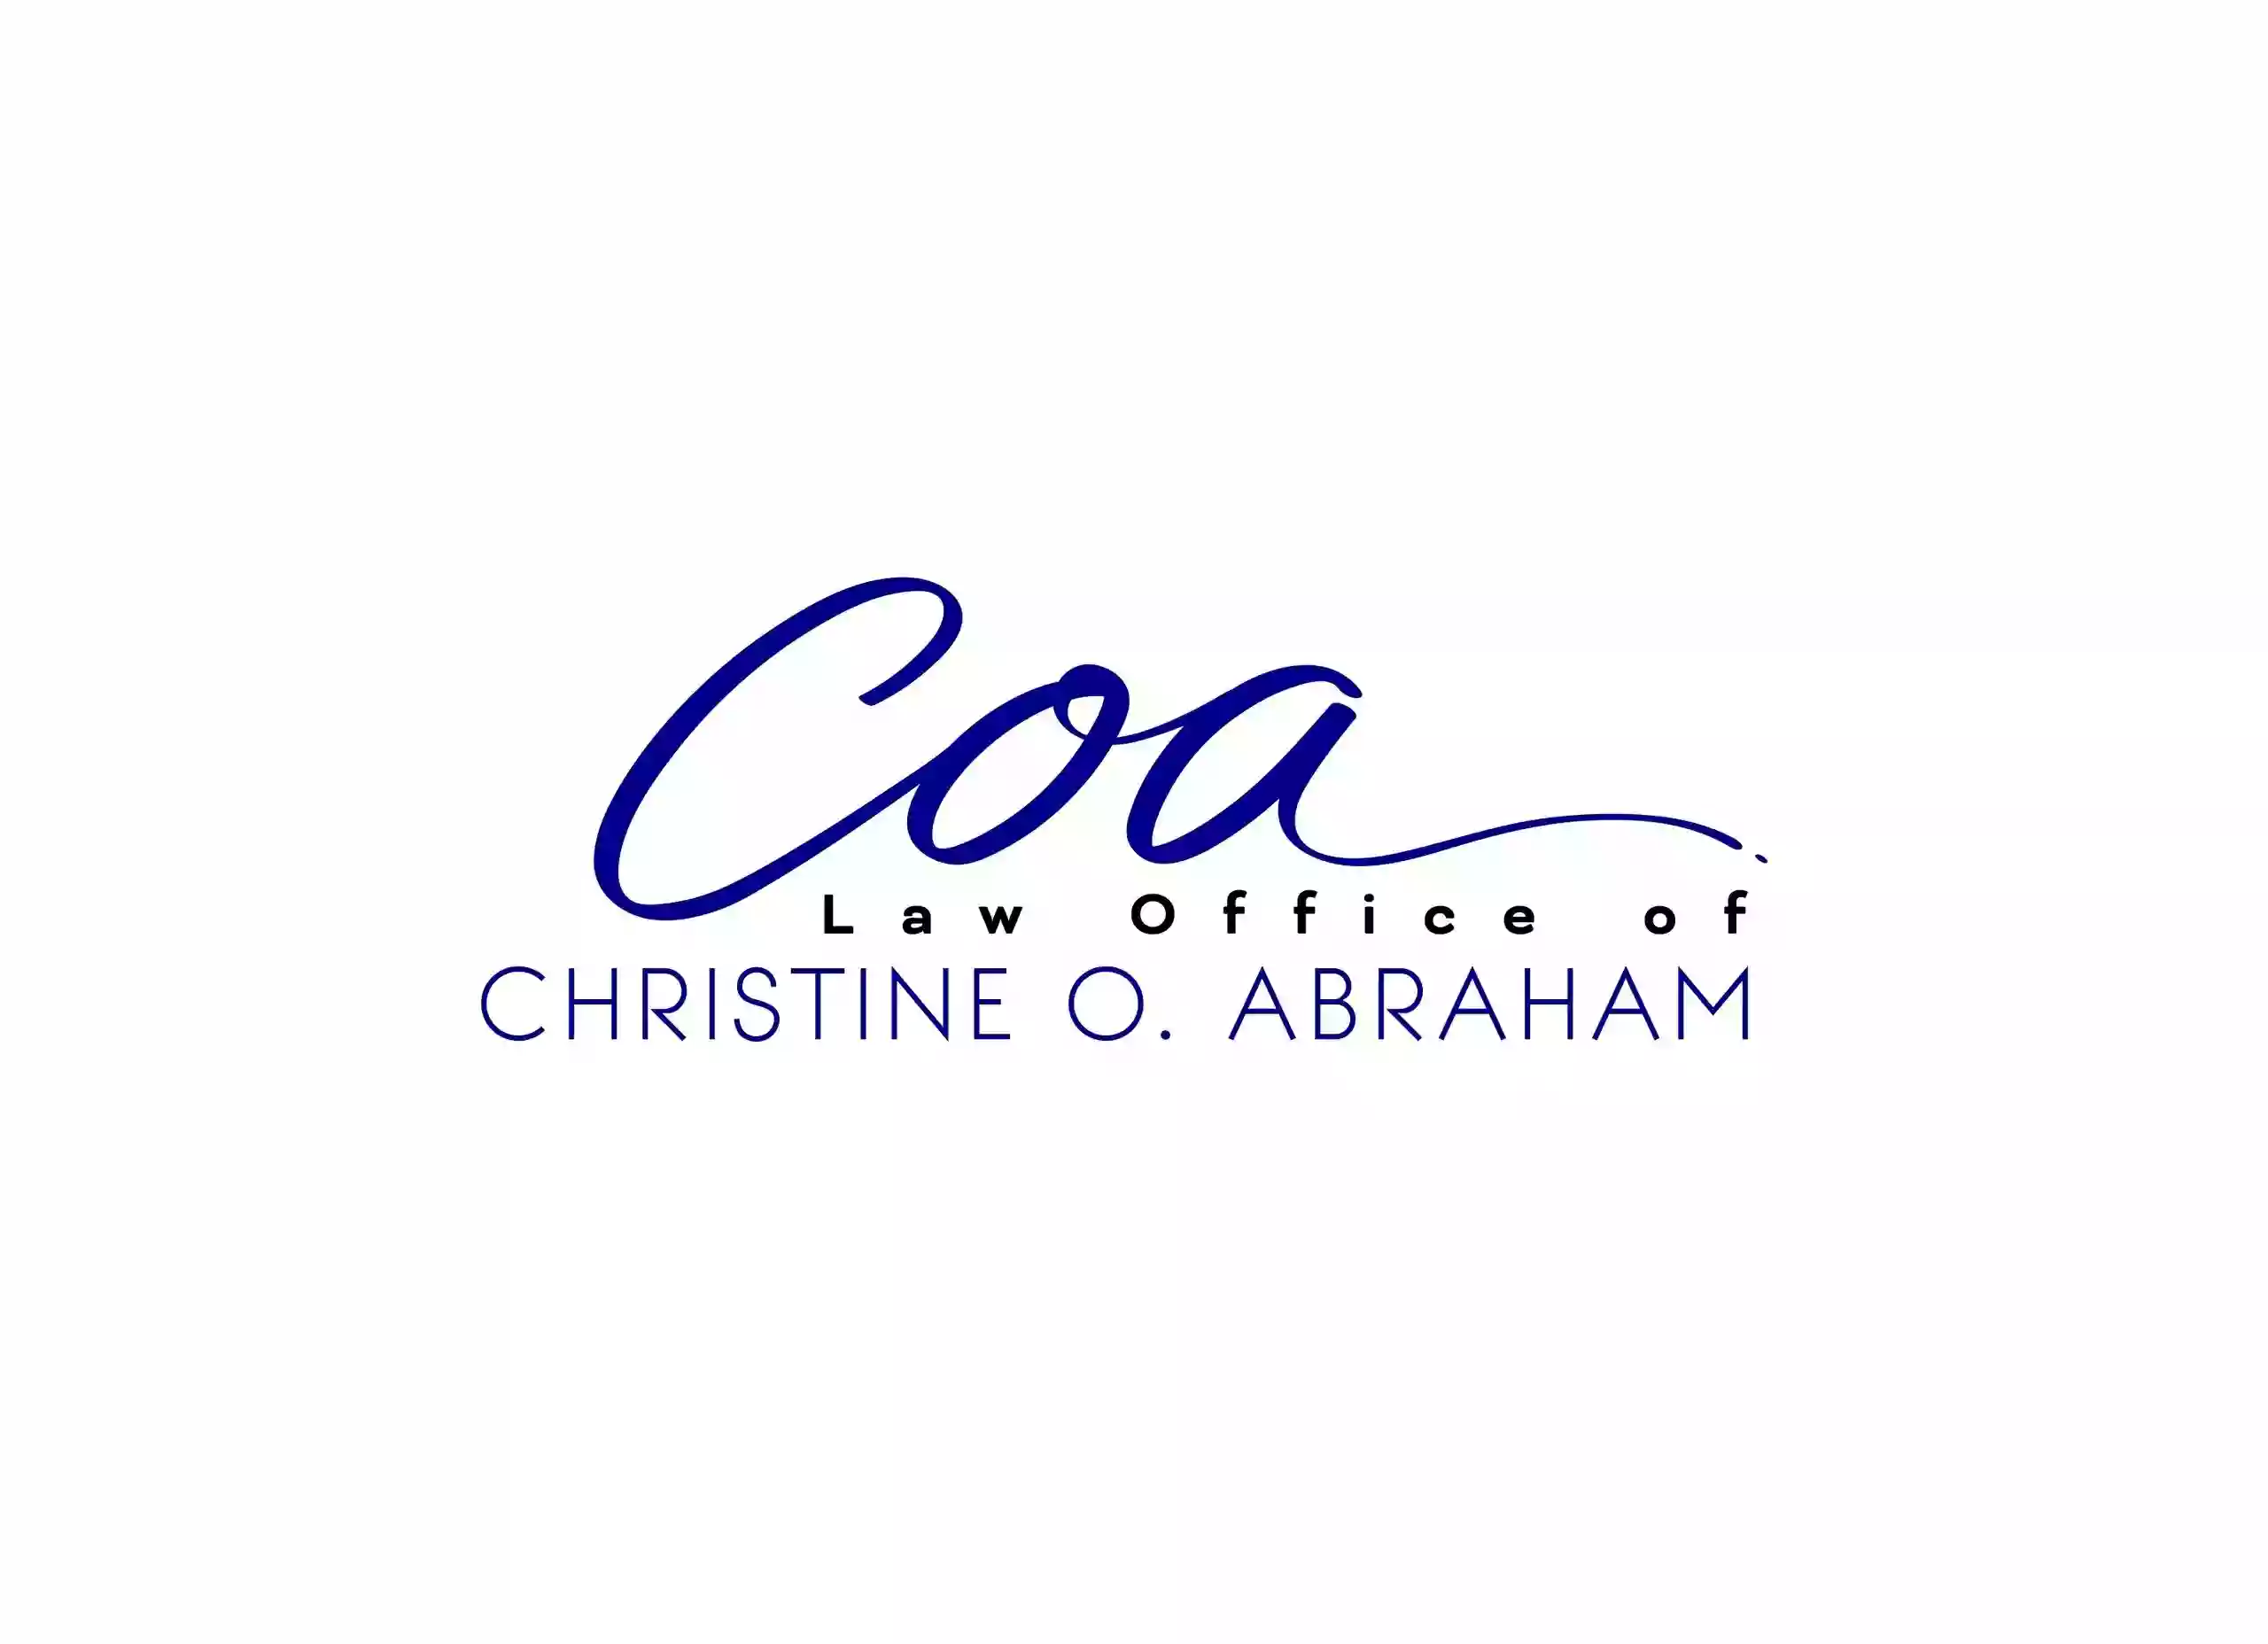 Law Office of Christine O. Abraham